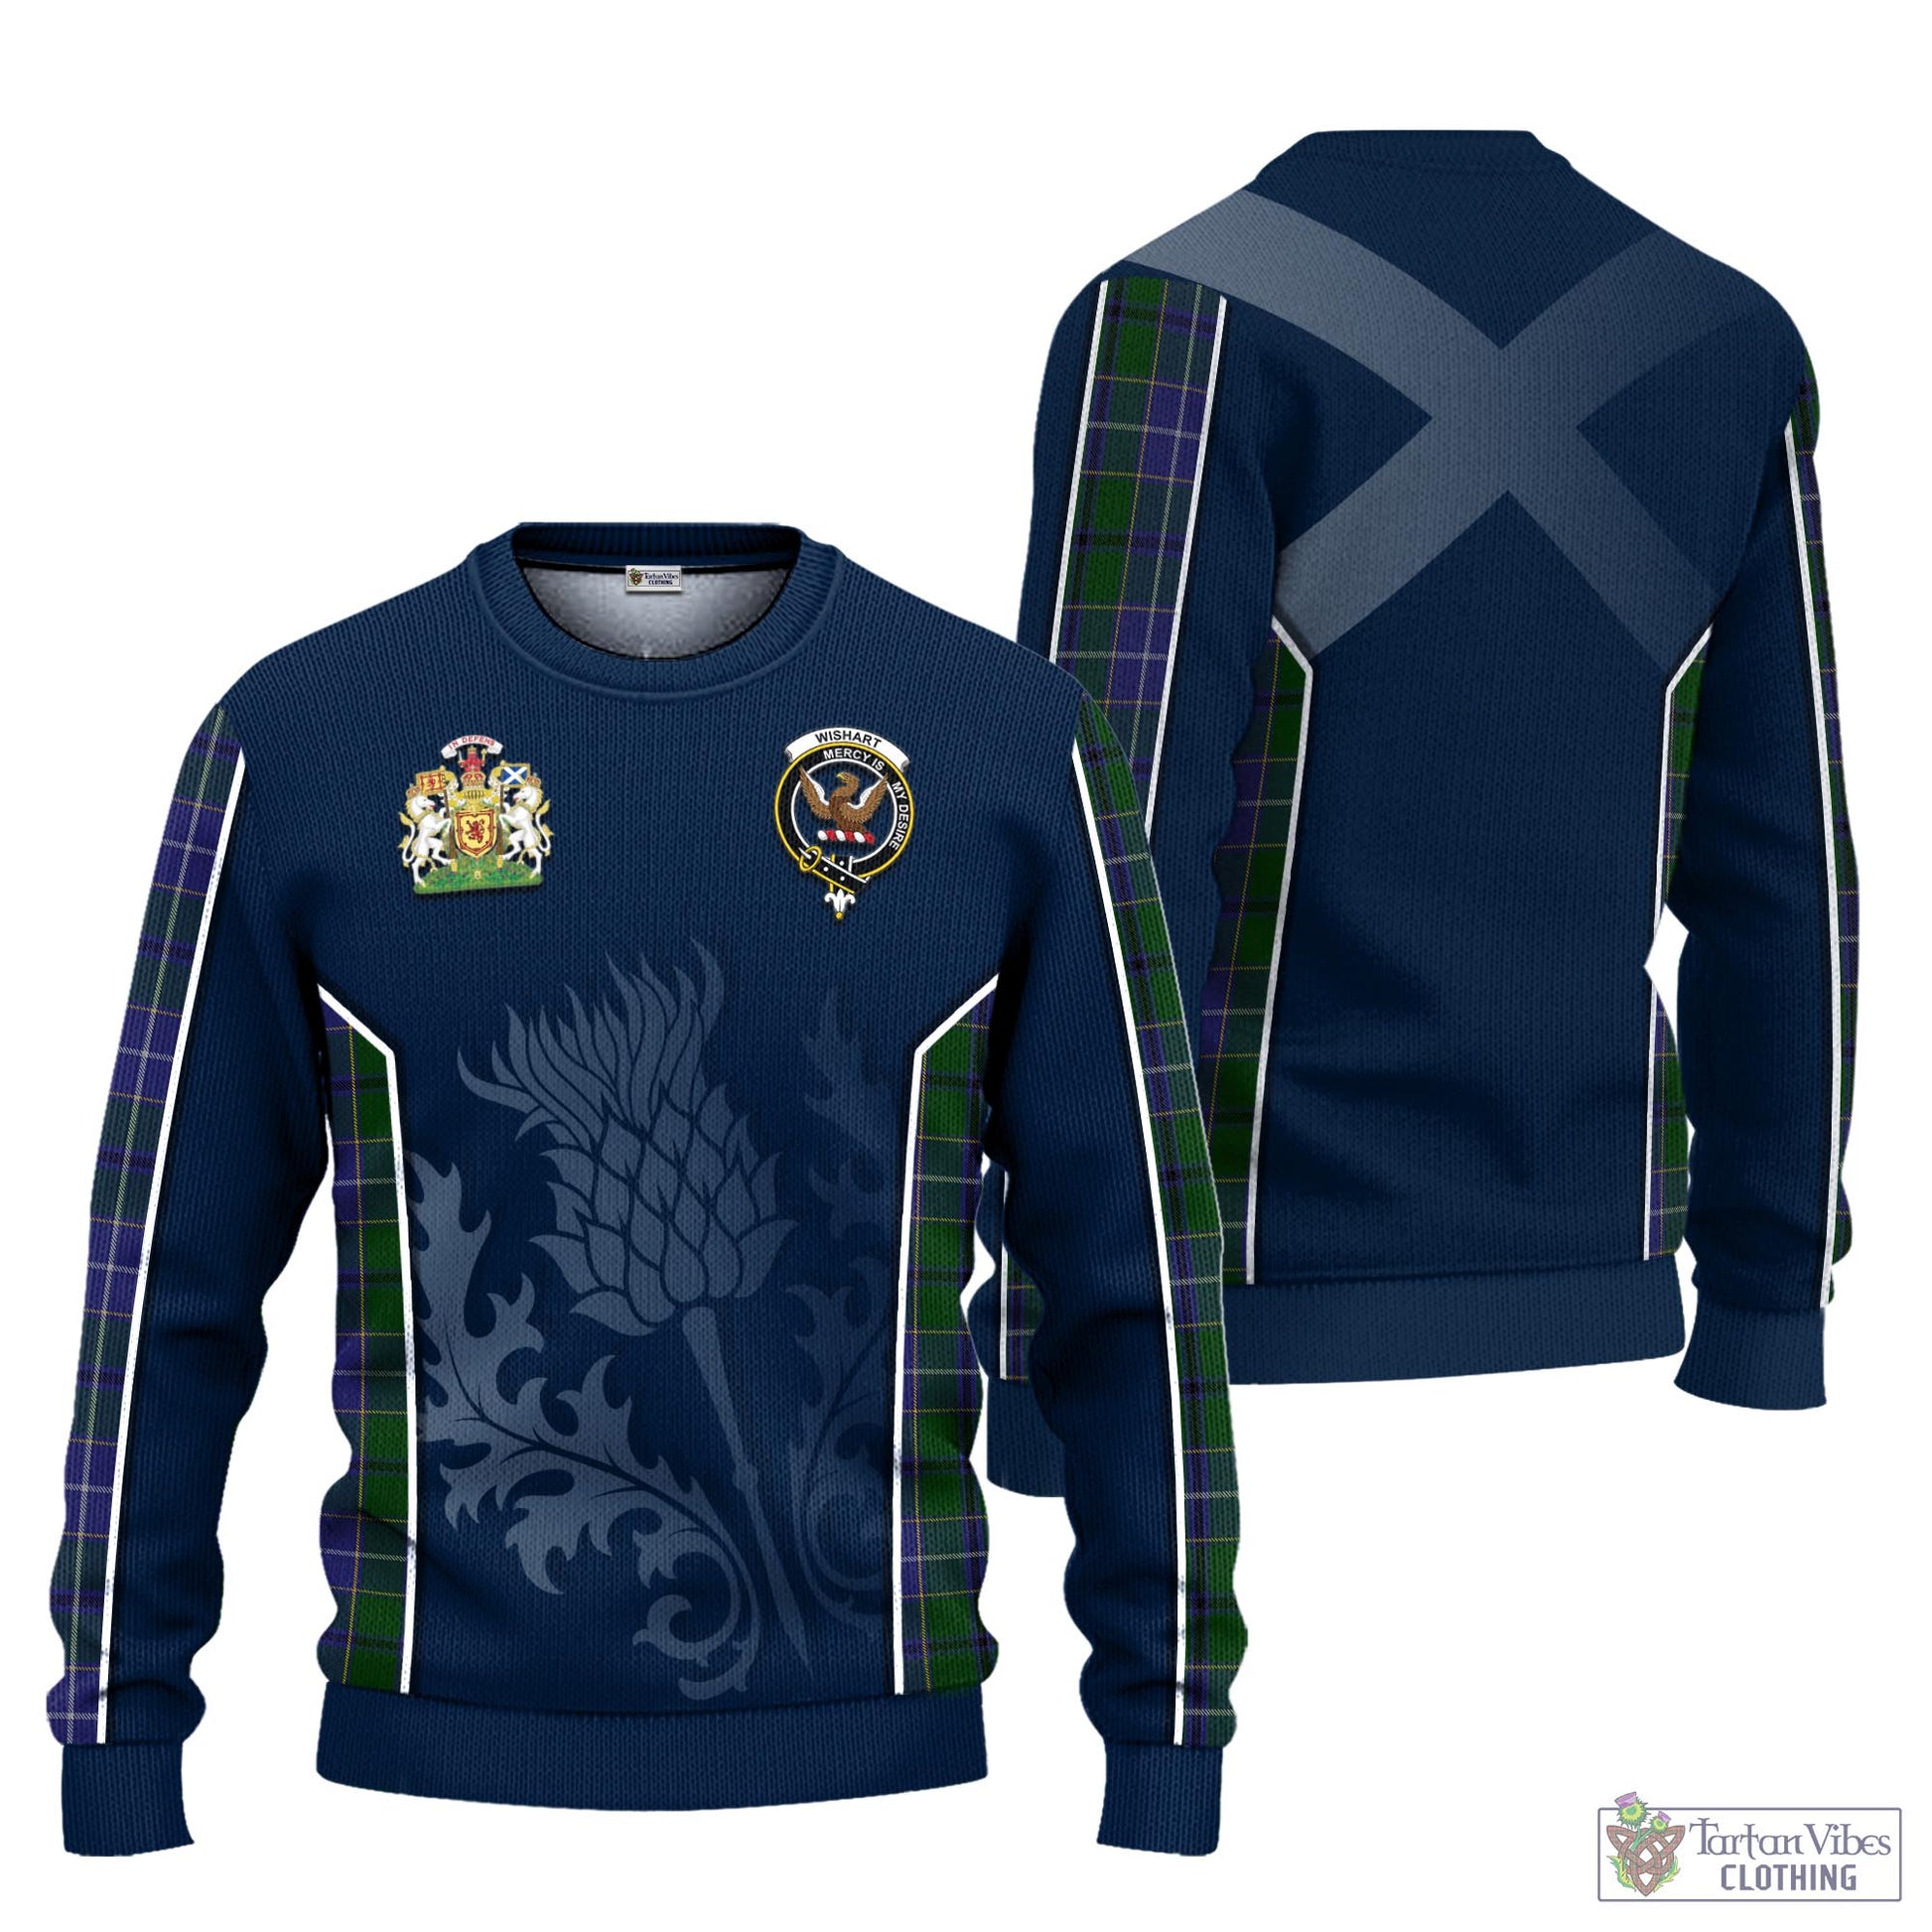 Tartan Vibes Clothing Wishart Hunting Tartan Knitted Sweatshirt with Family Crest and Scottish Thistle Vibes Sport Style